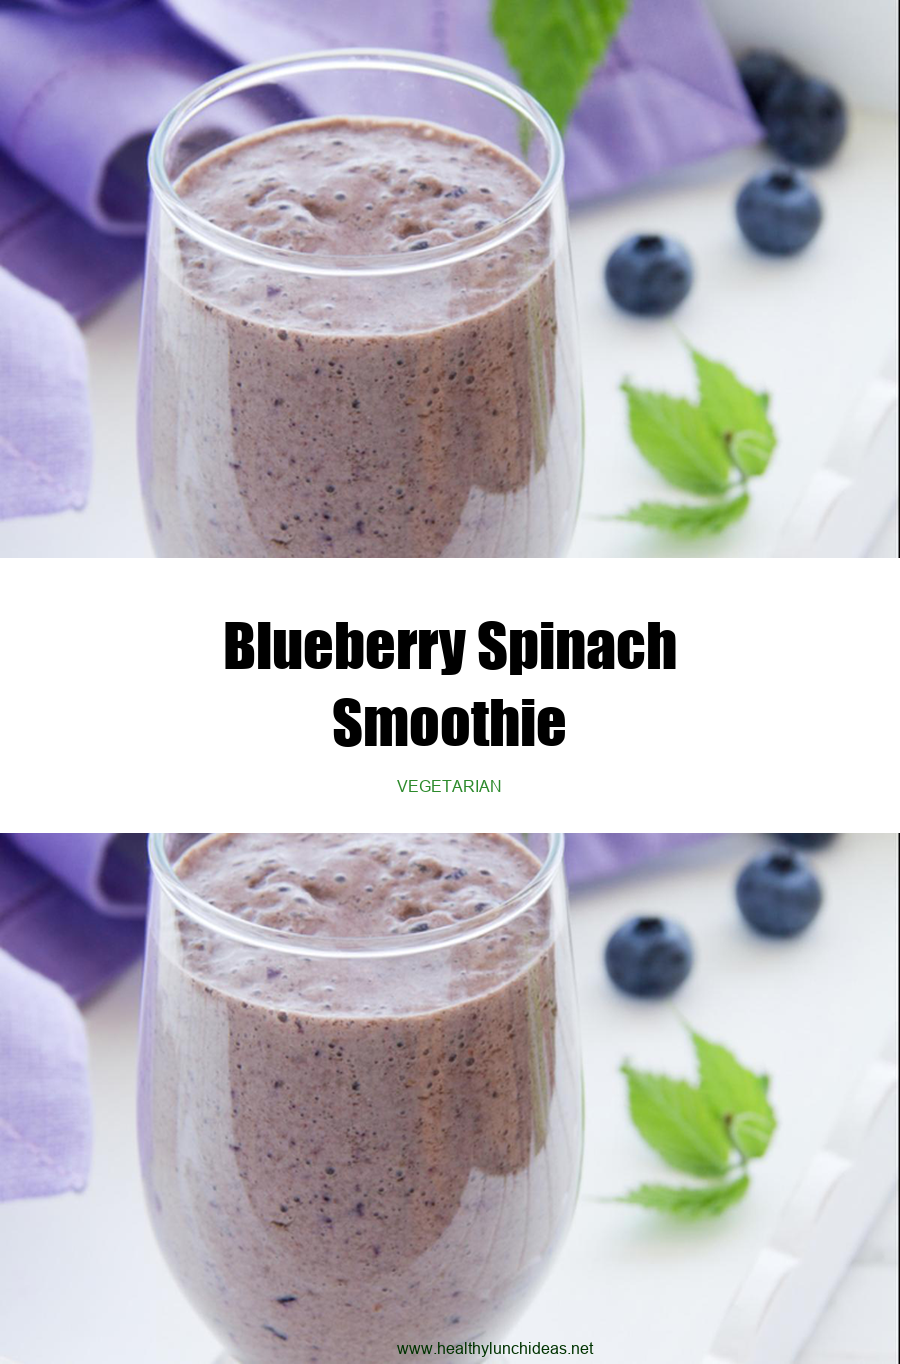 Healthy Recipes: Blueberry Spinach Smoothie Recipe